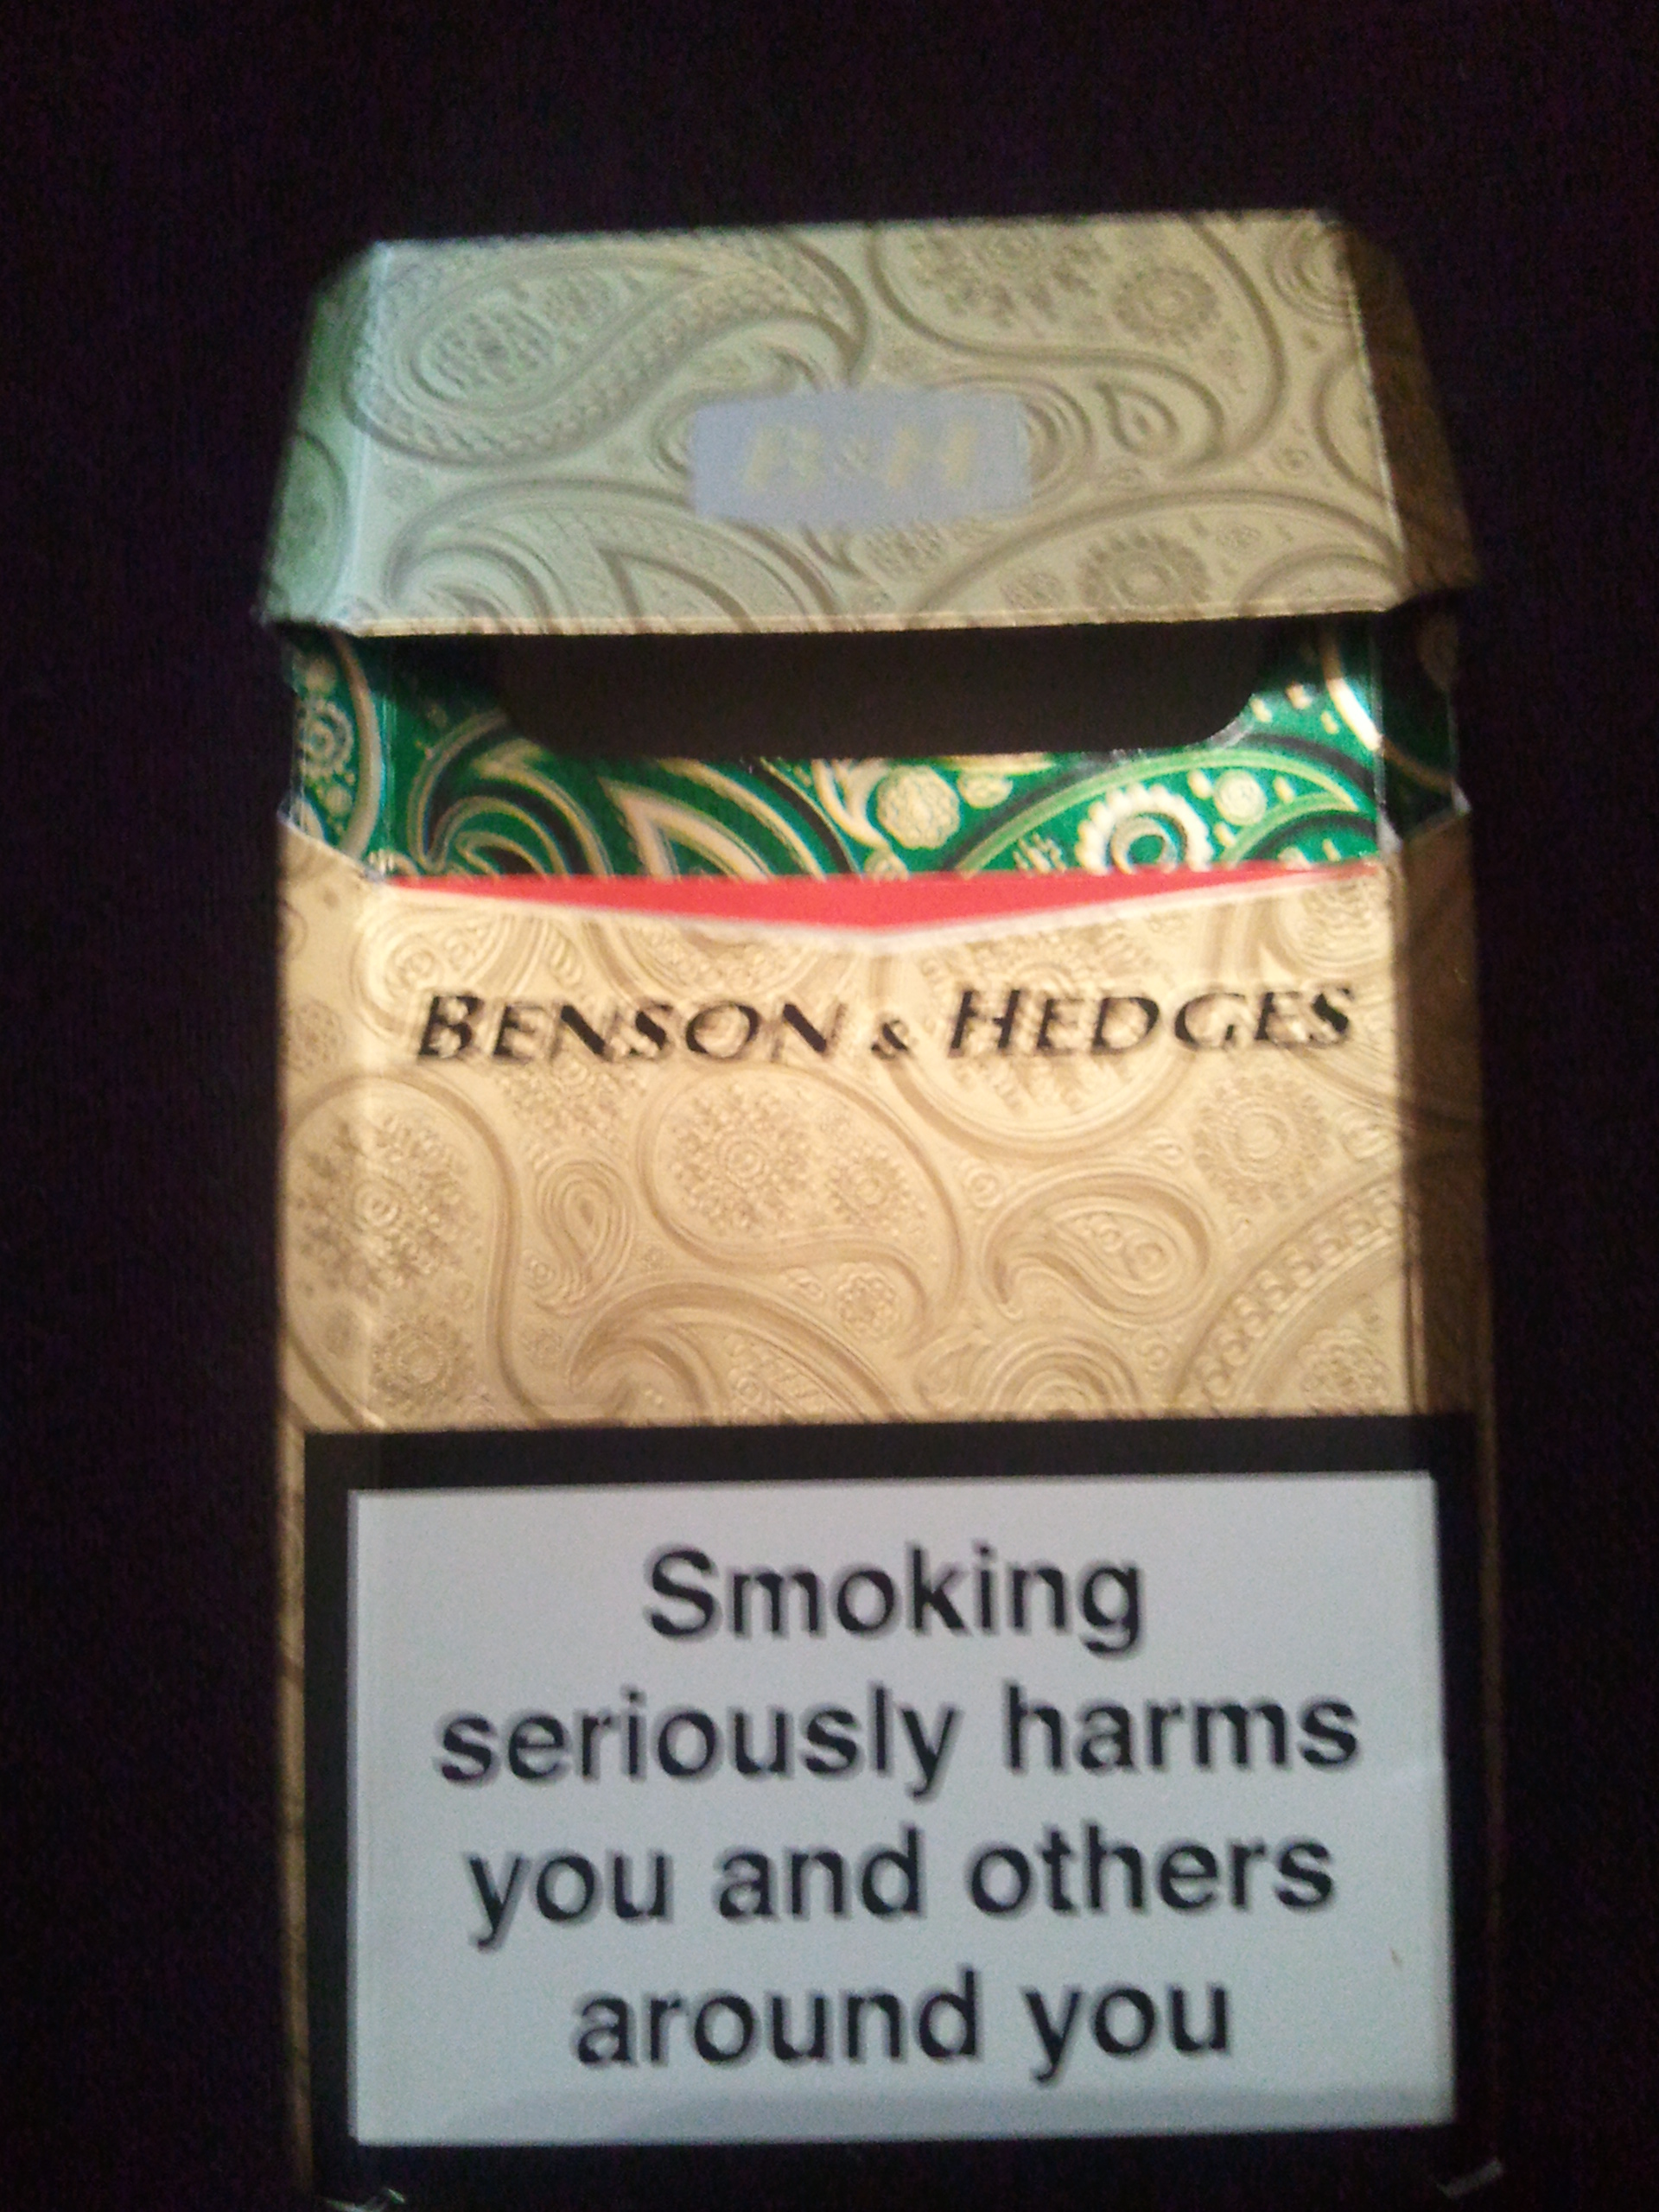 Benson hedges gold 20s limited edition open.jpg